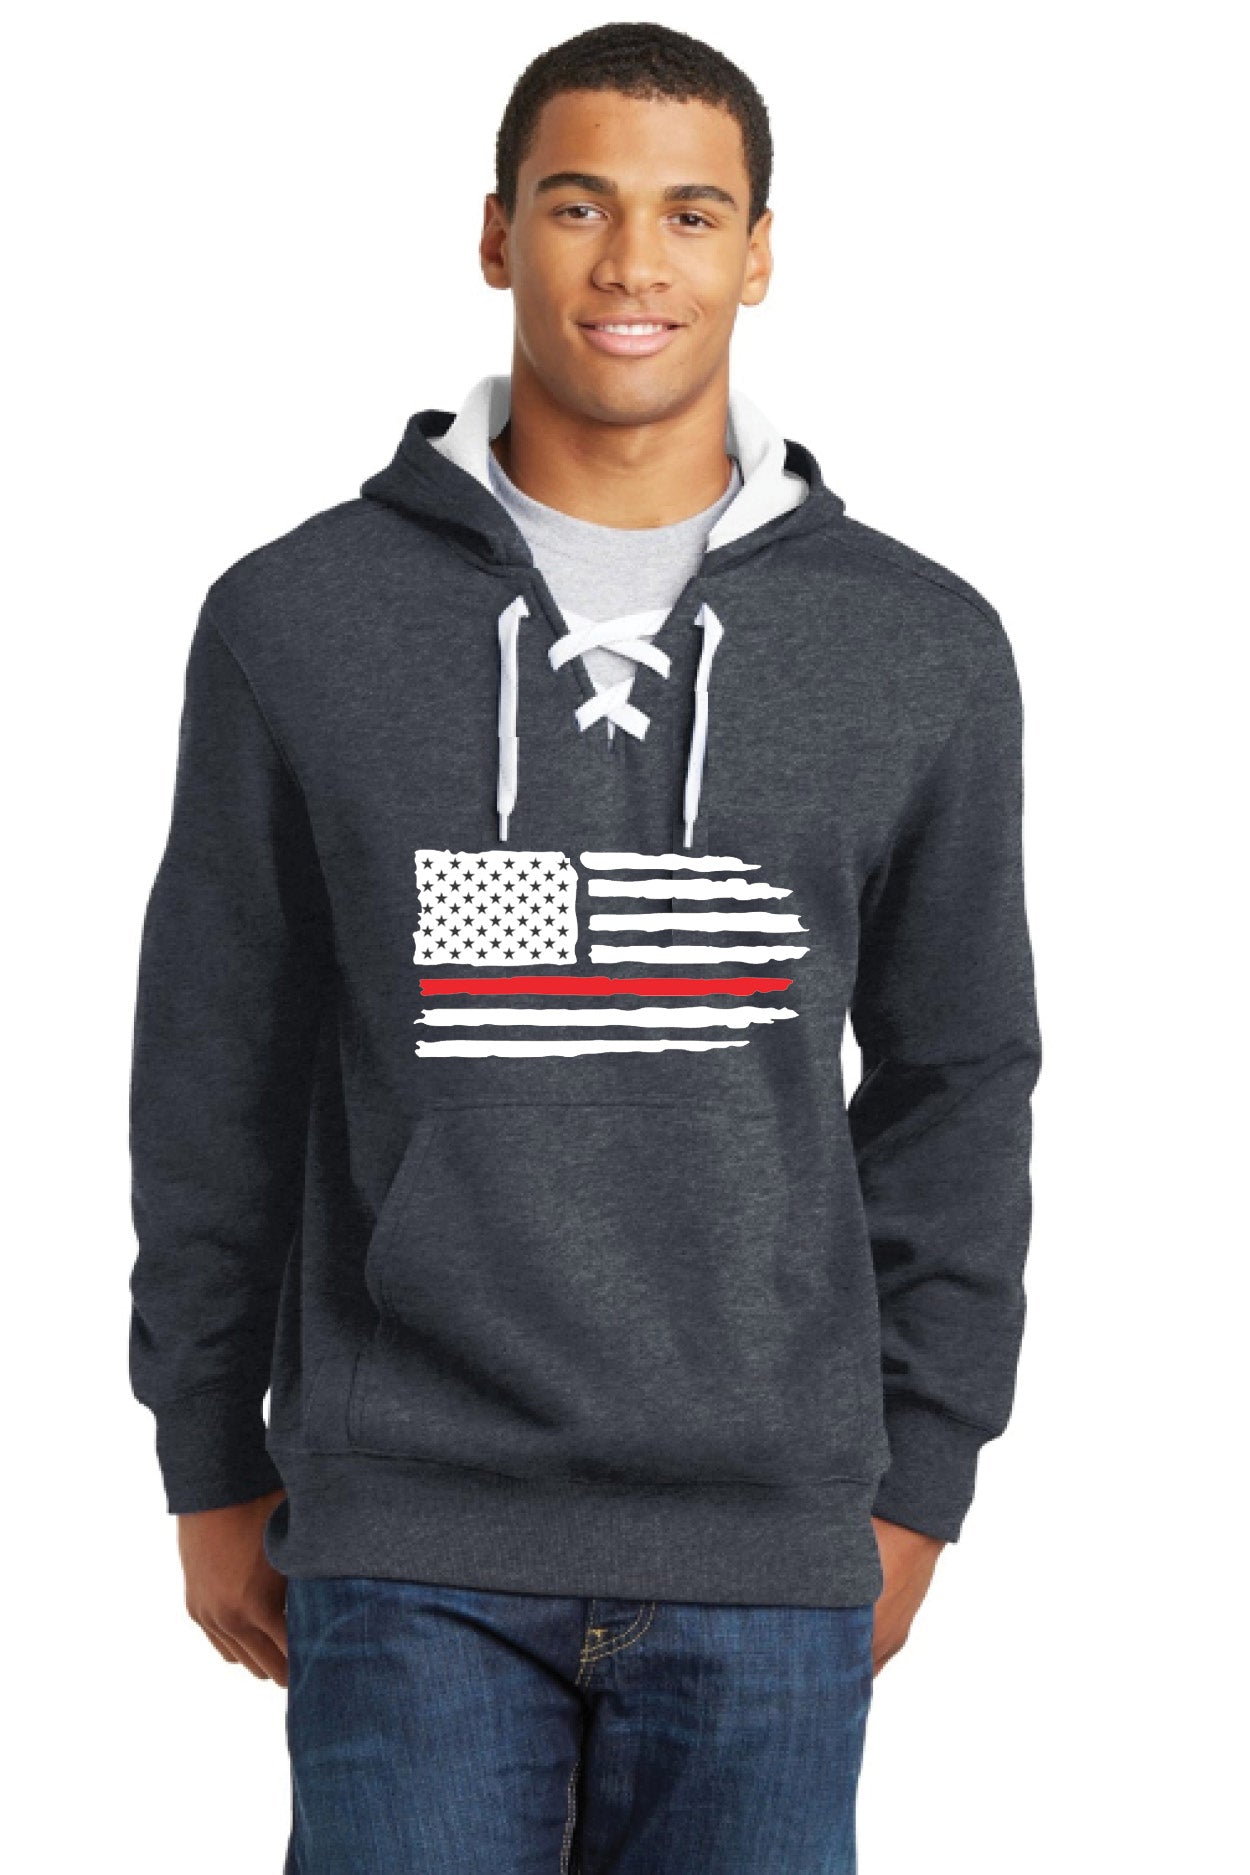 Lace Up Pullover Hooded Sweatshirt with Full Front Red Line Flag